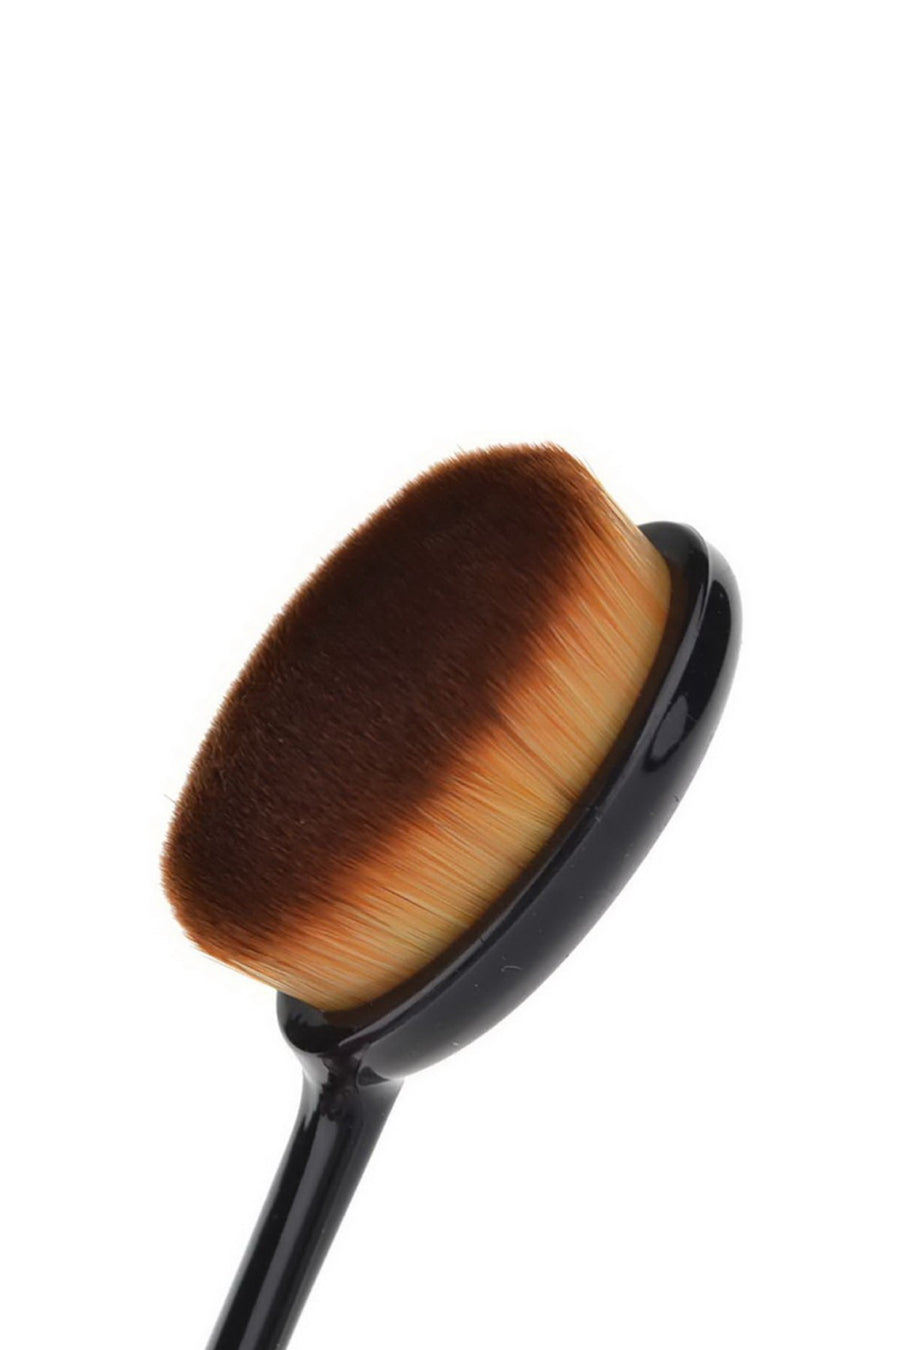 Wow Flawlessly As Possible Brush - Blend Mineral Cosmetics